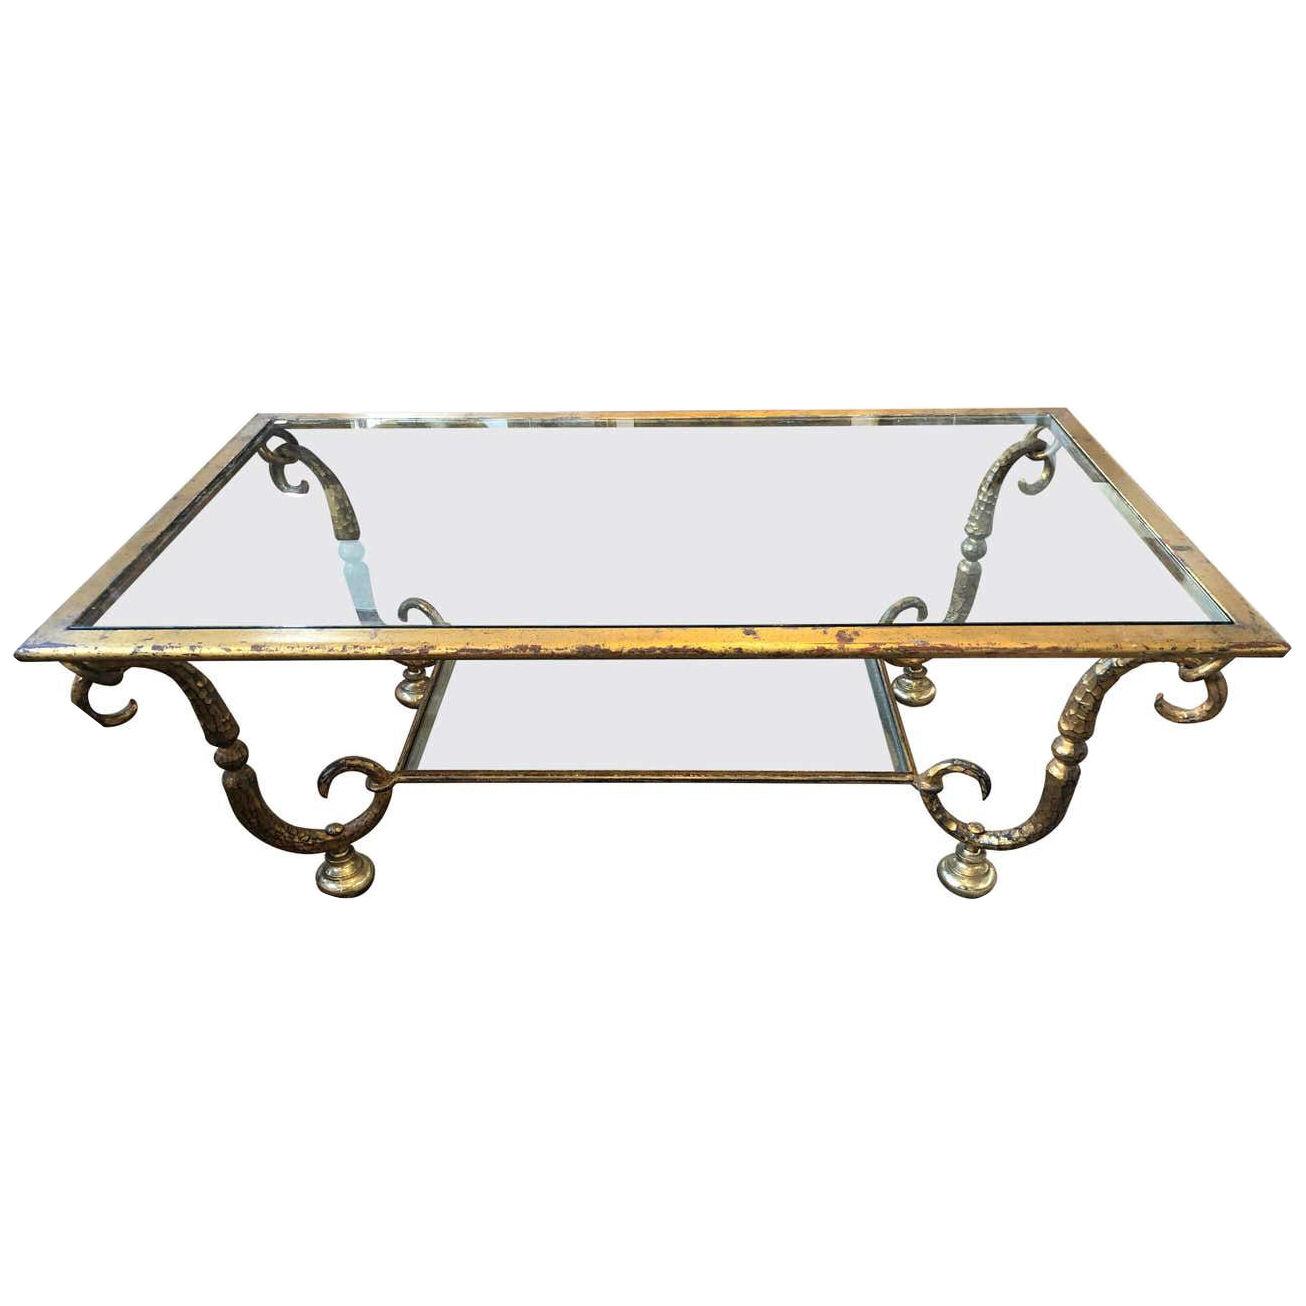 Maison Ramsay Double Tray Coffee Table Gilded Iron Gold Leaf Finishing, 1940s